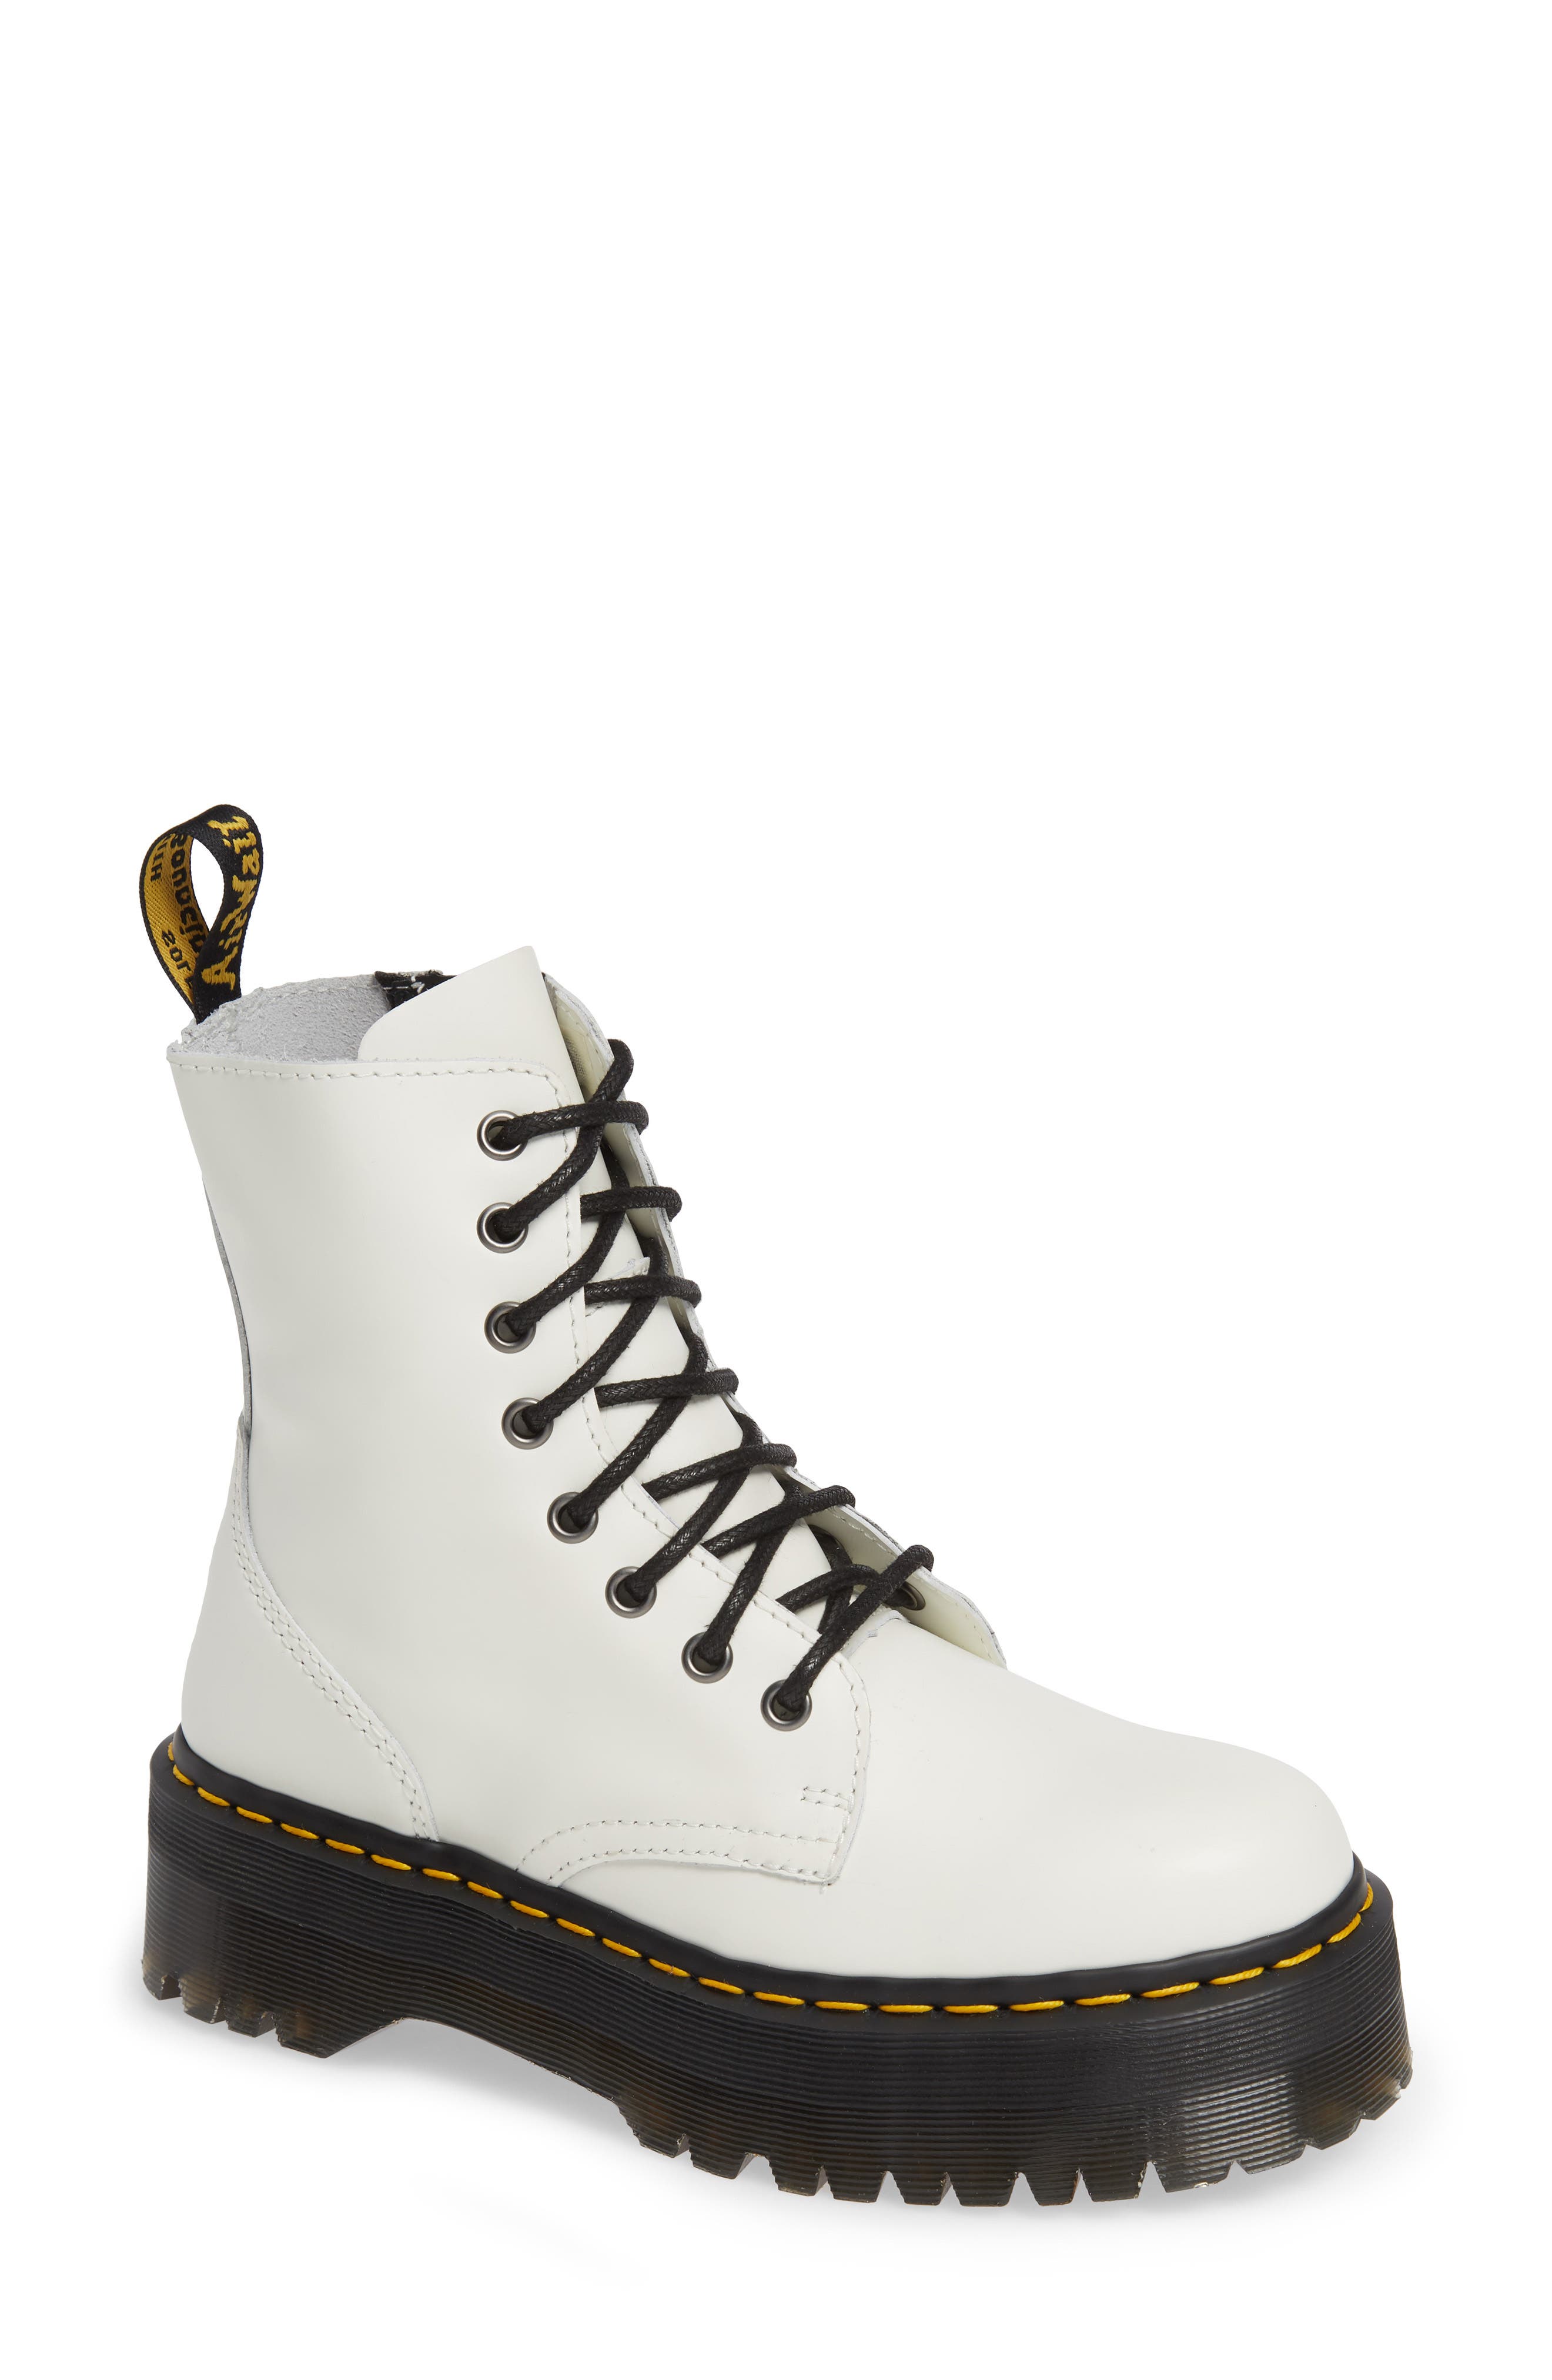 Dr. Martens 'Jadon' Boot in White Smooth Leather at Nordstrom